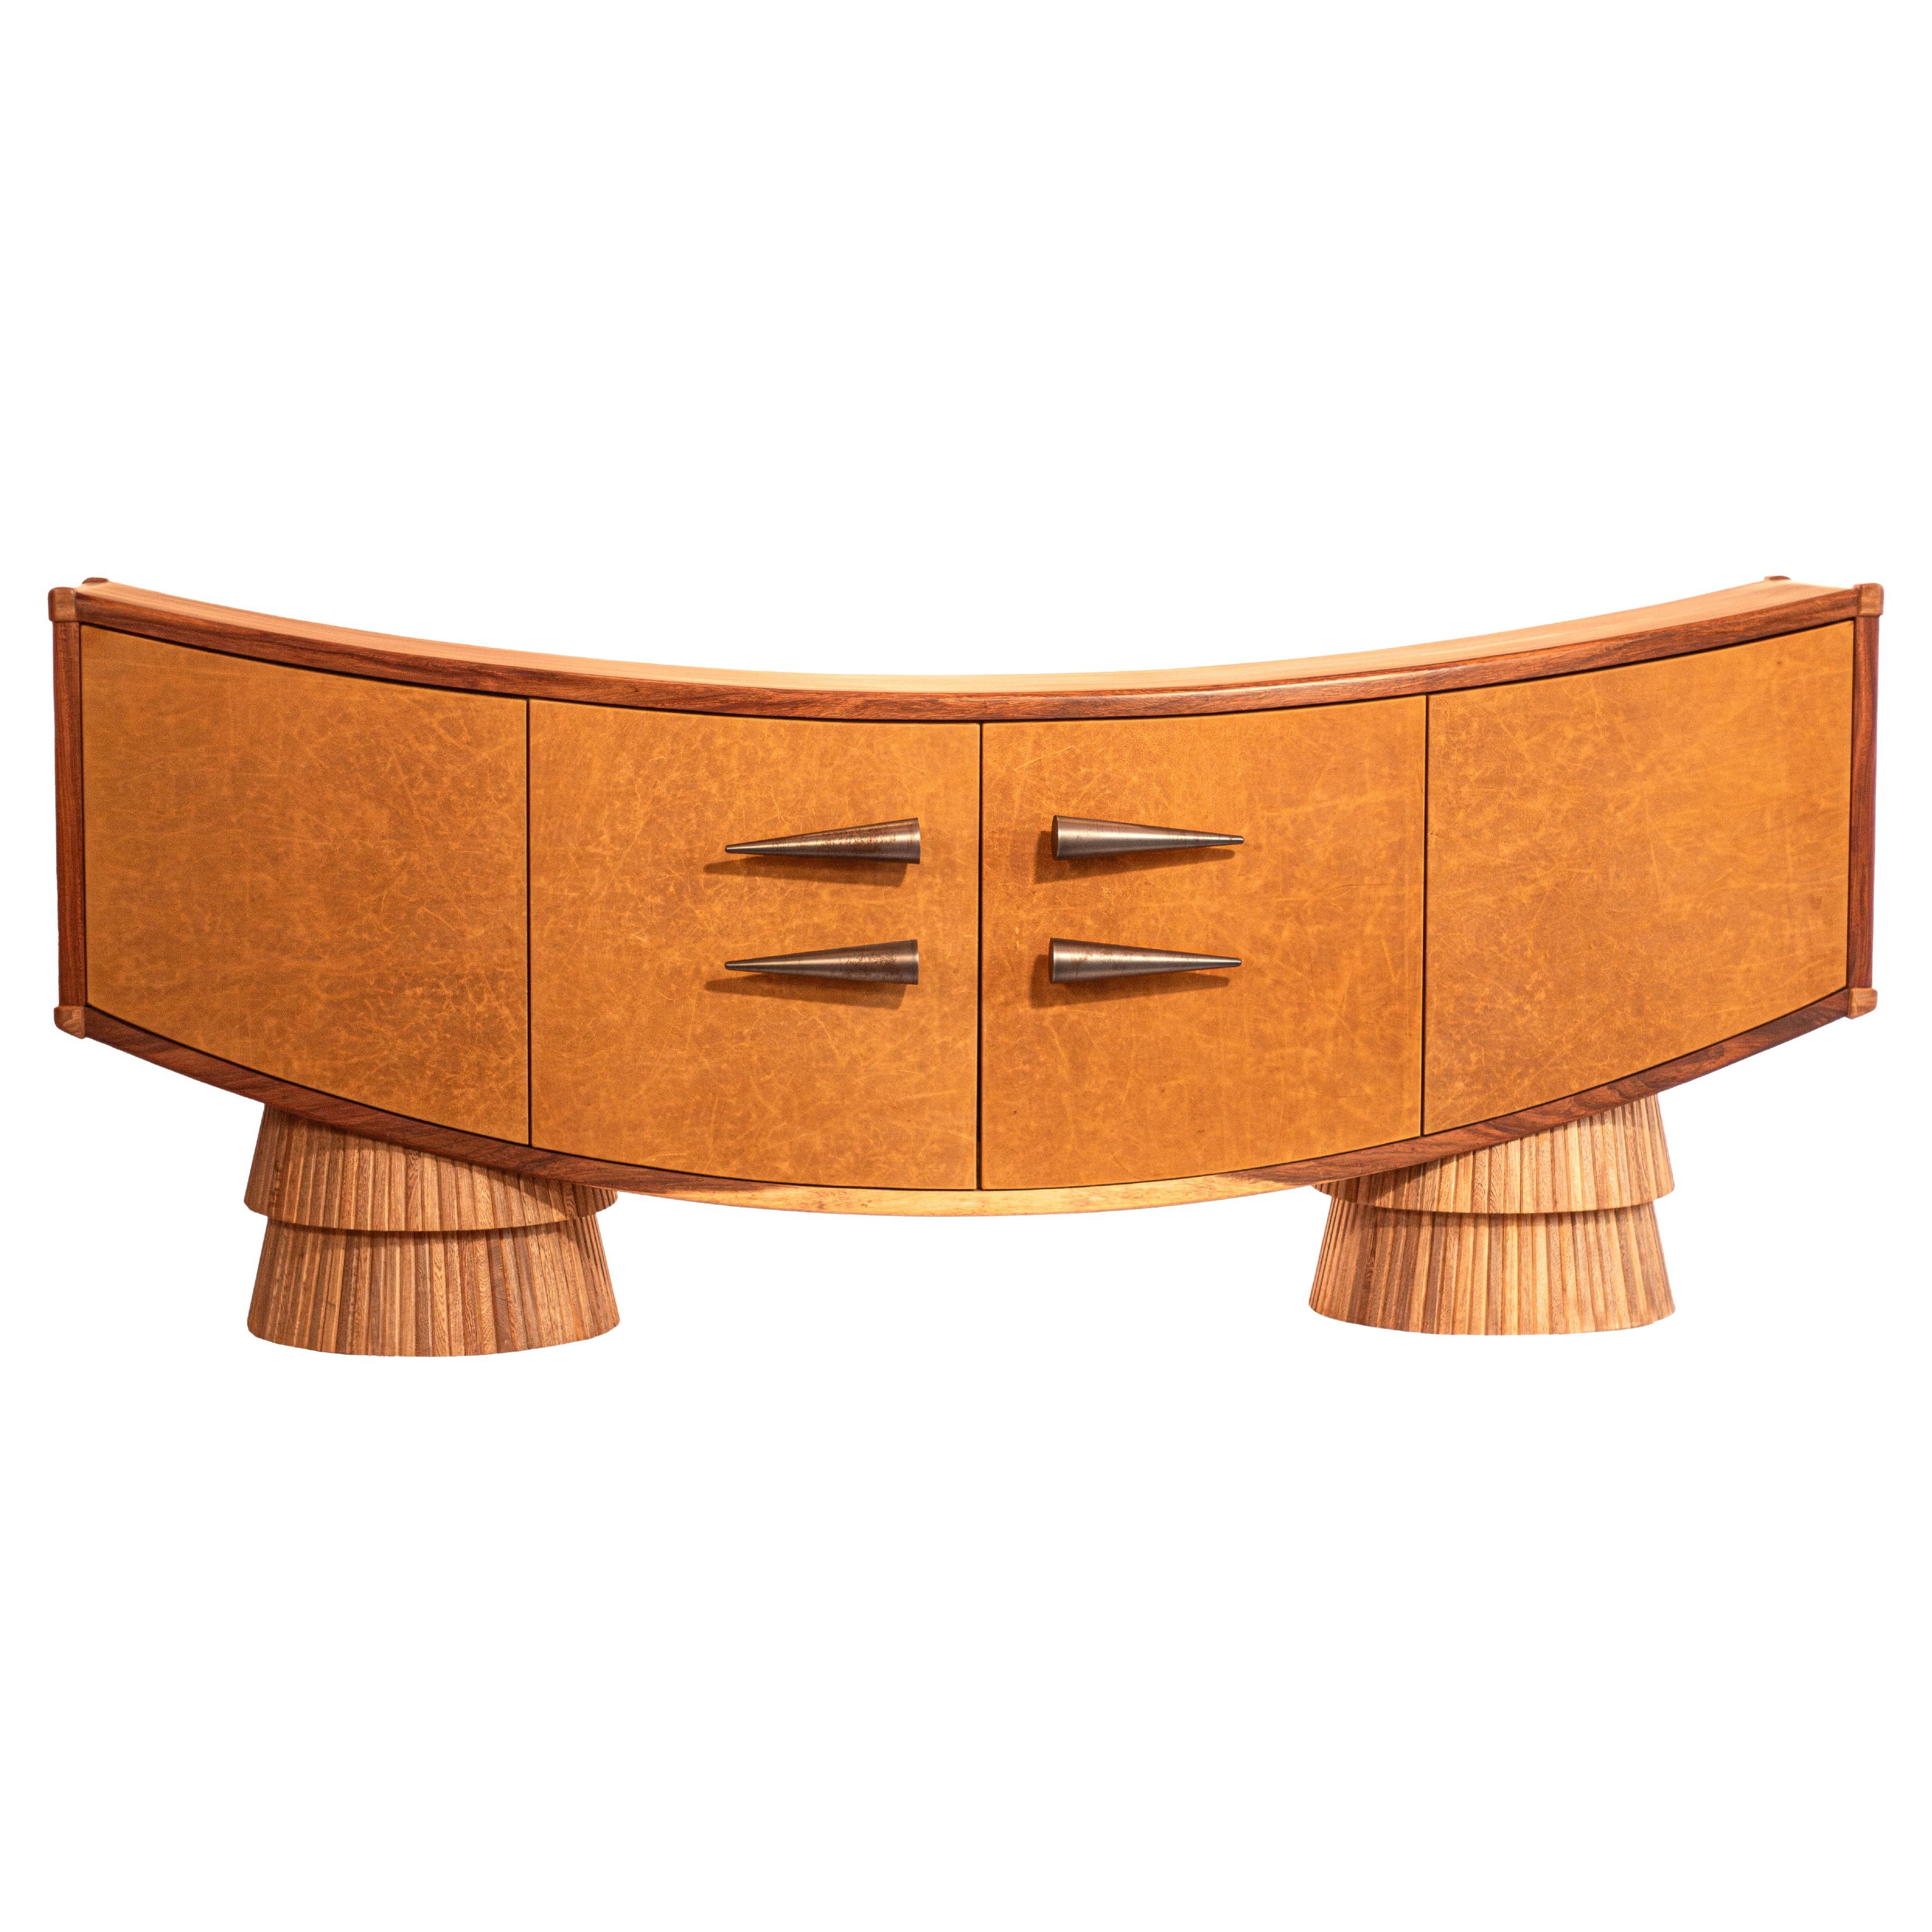 Eliseo - Large Avant-garde Mexican Hardwood and Leather, Anthropomorphic Buffet For Sale